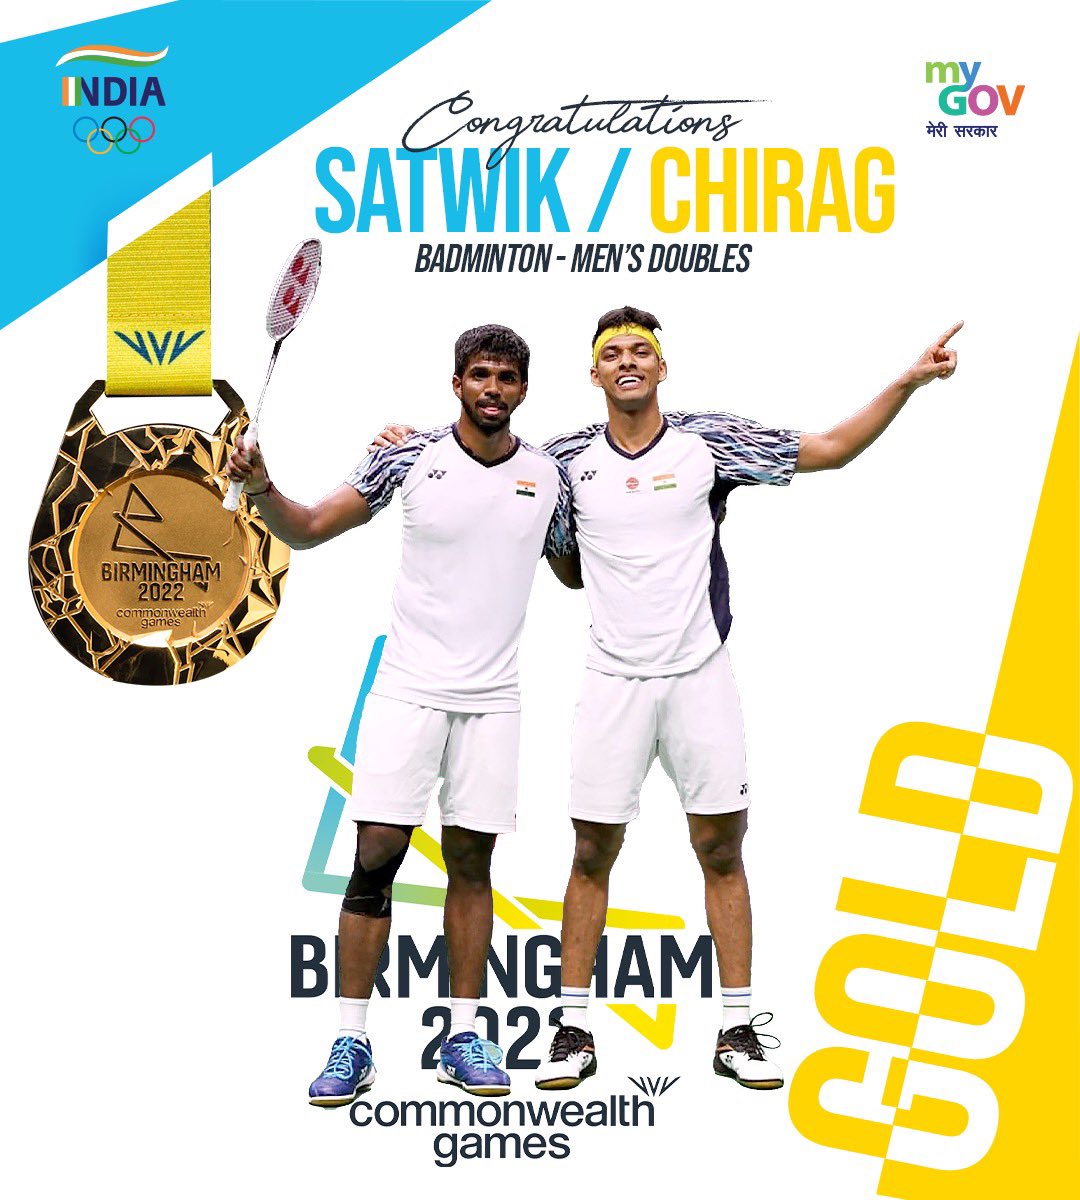 The dynamic duo wins 🥇 in Badminton Men's doubles 🏸 at #CWG2022 Birmingham!

Congratulations to Satwik and Chirag for making India proud! 

India’s badminton contingent scripts HISTORY!
#YuvaShakti #CheerForIndia